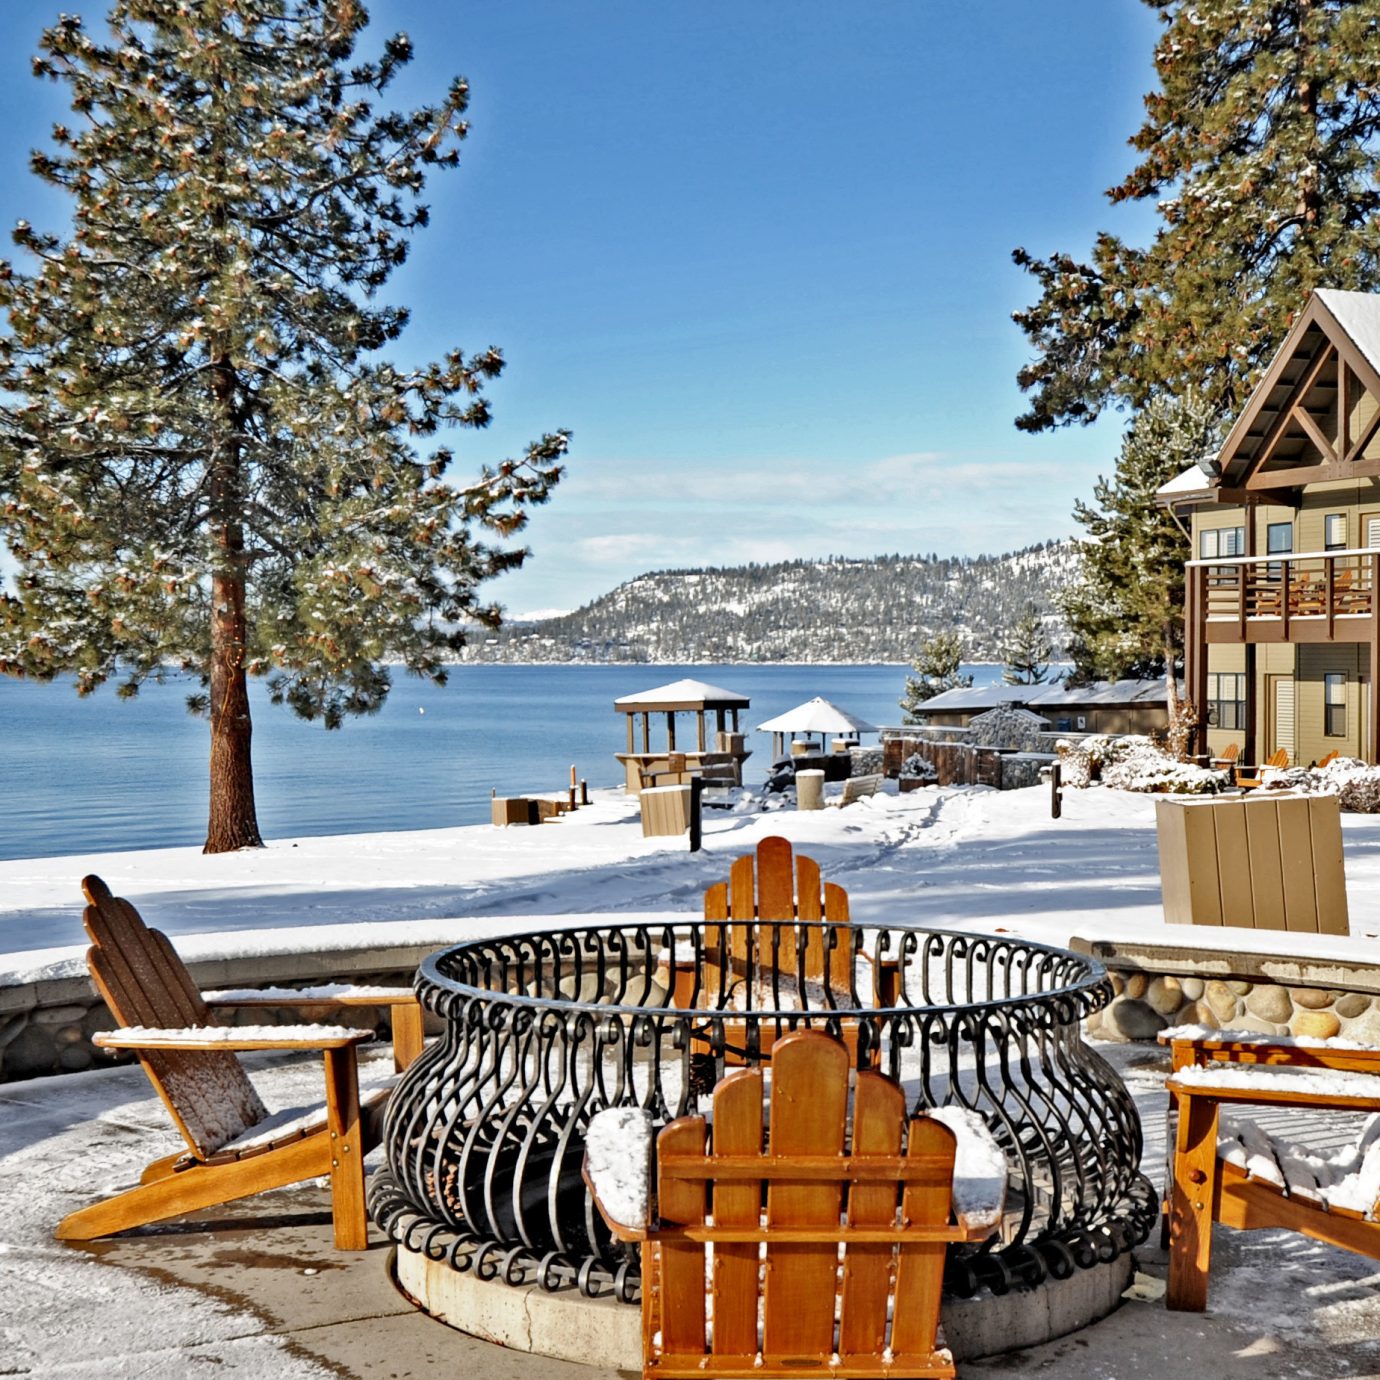 Firepit Lounge Mountains Natural wonders Nature Outdoor Activities Outdoors Scenic views Waterfront tree sky bench ground chair wooden Winter Picnic season Resort snow park home walkway Sea Lake vehicle dock log cabin overlooking Deck